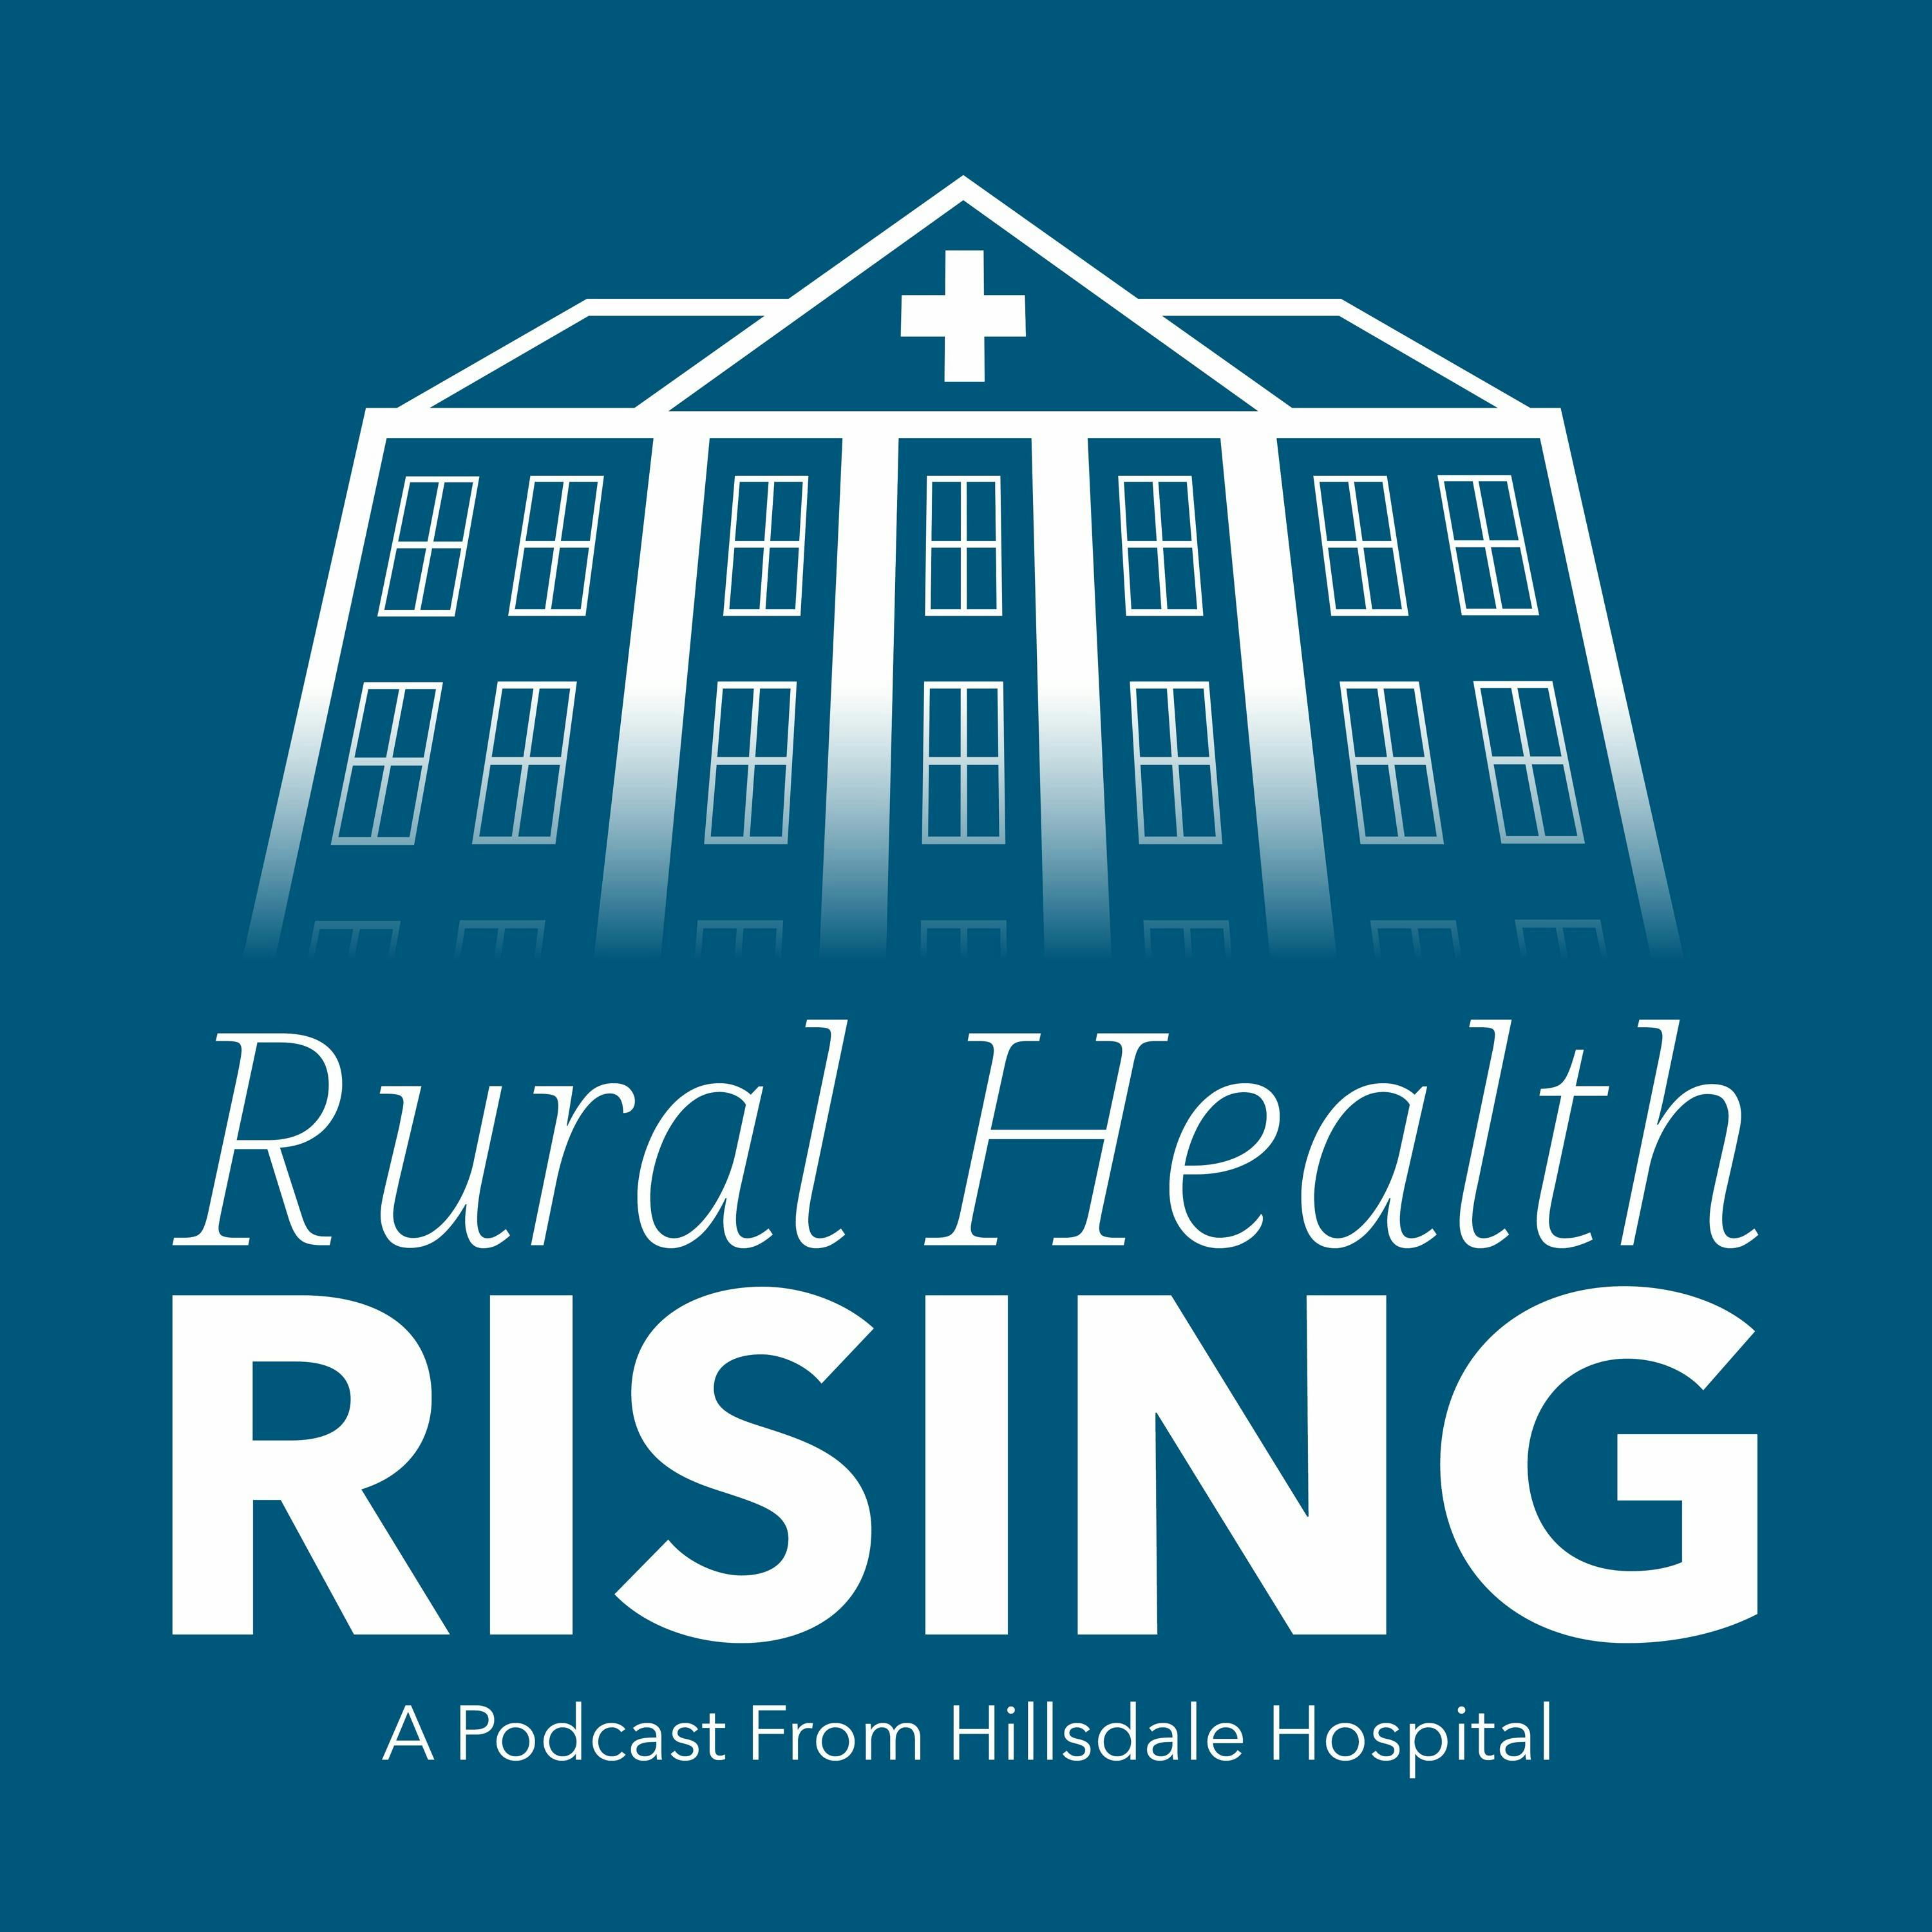 Episode 27: Risk in the Rural Environment